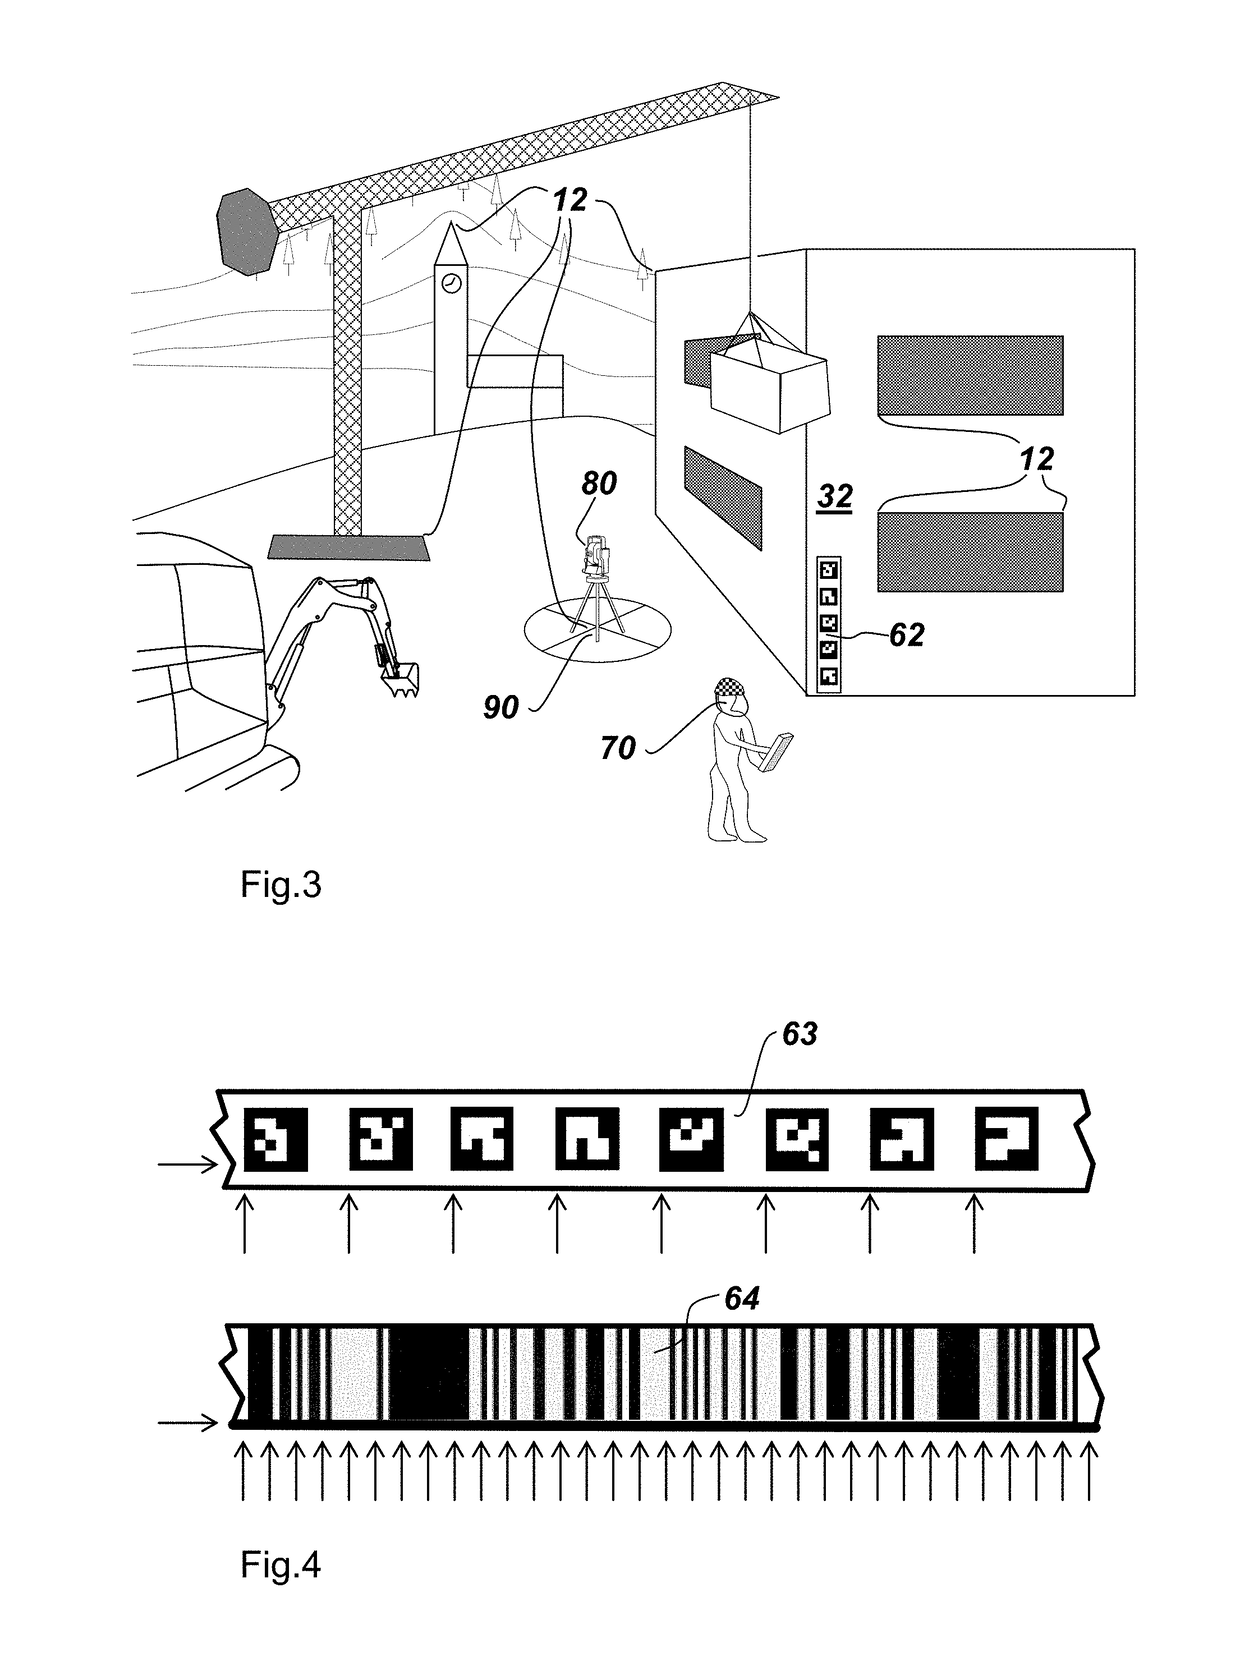 Near field maneuvering for ar-device using image tracking